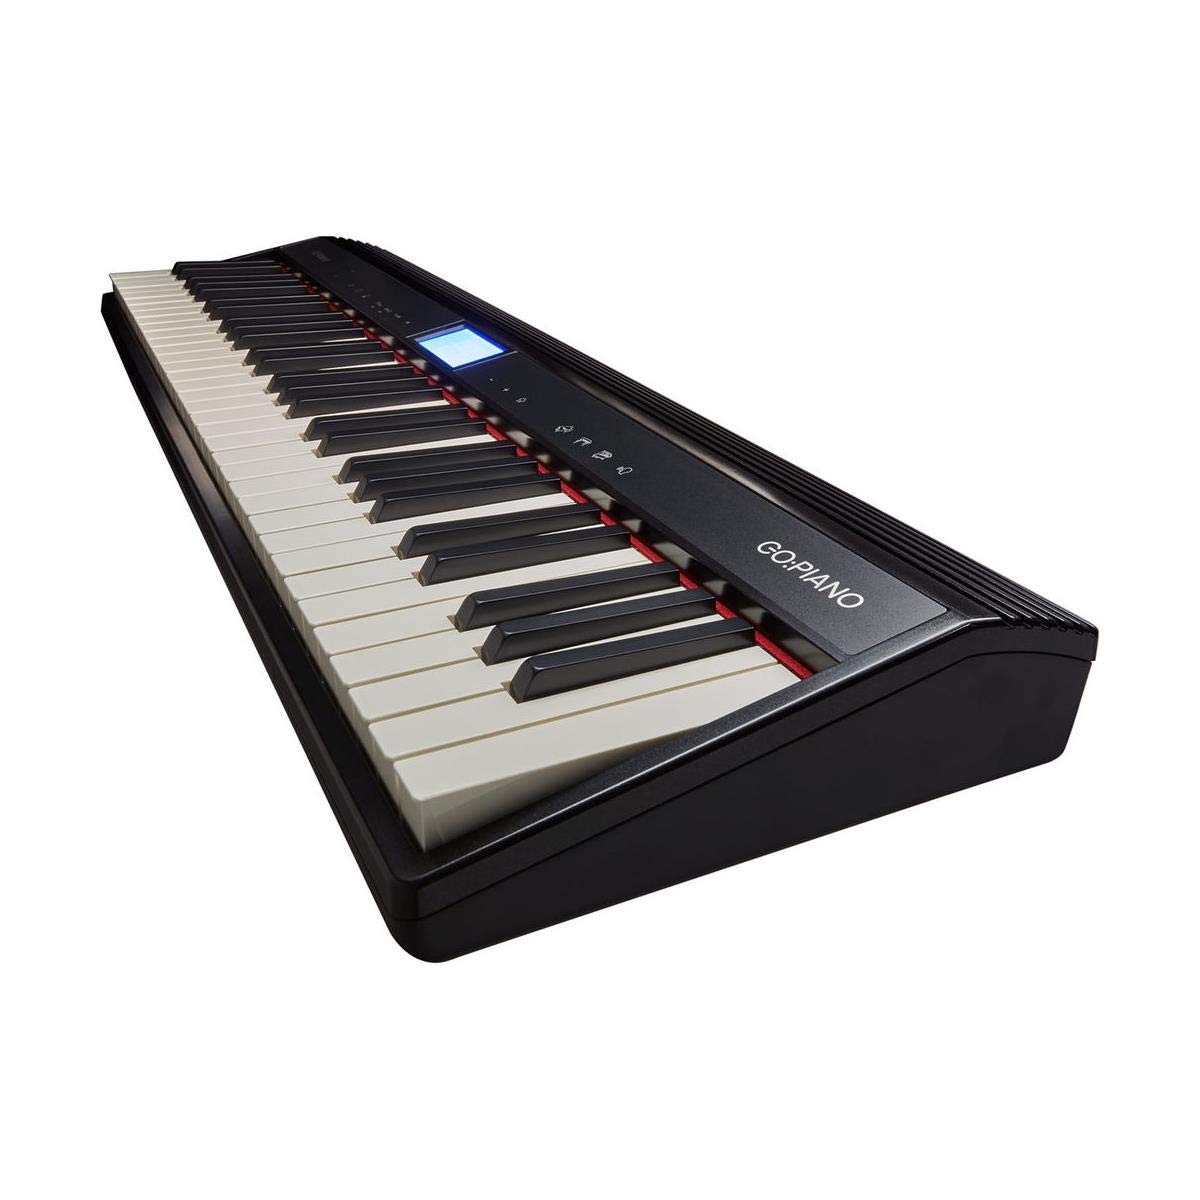 Roland GO:PIANO 61-key Digital Piano Keyboard with Integrated Bluetooth Speakers (GO-61P)